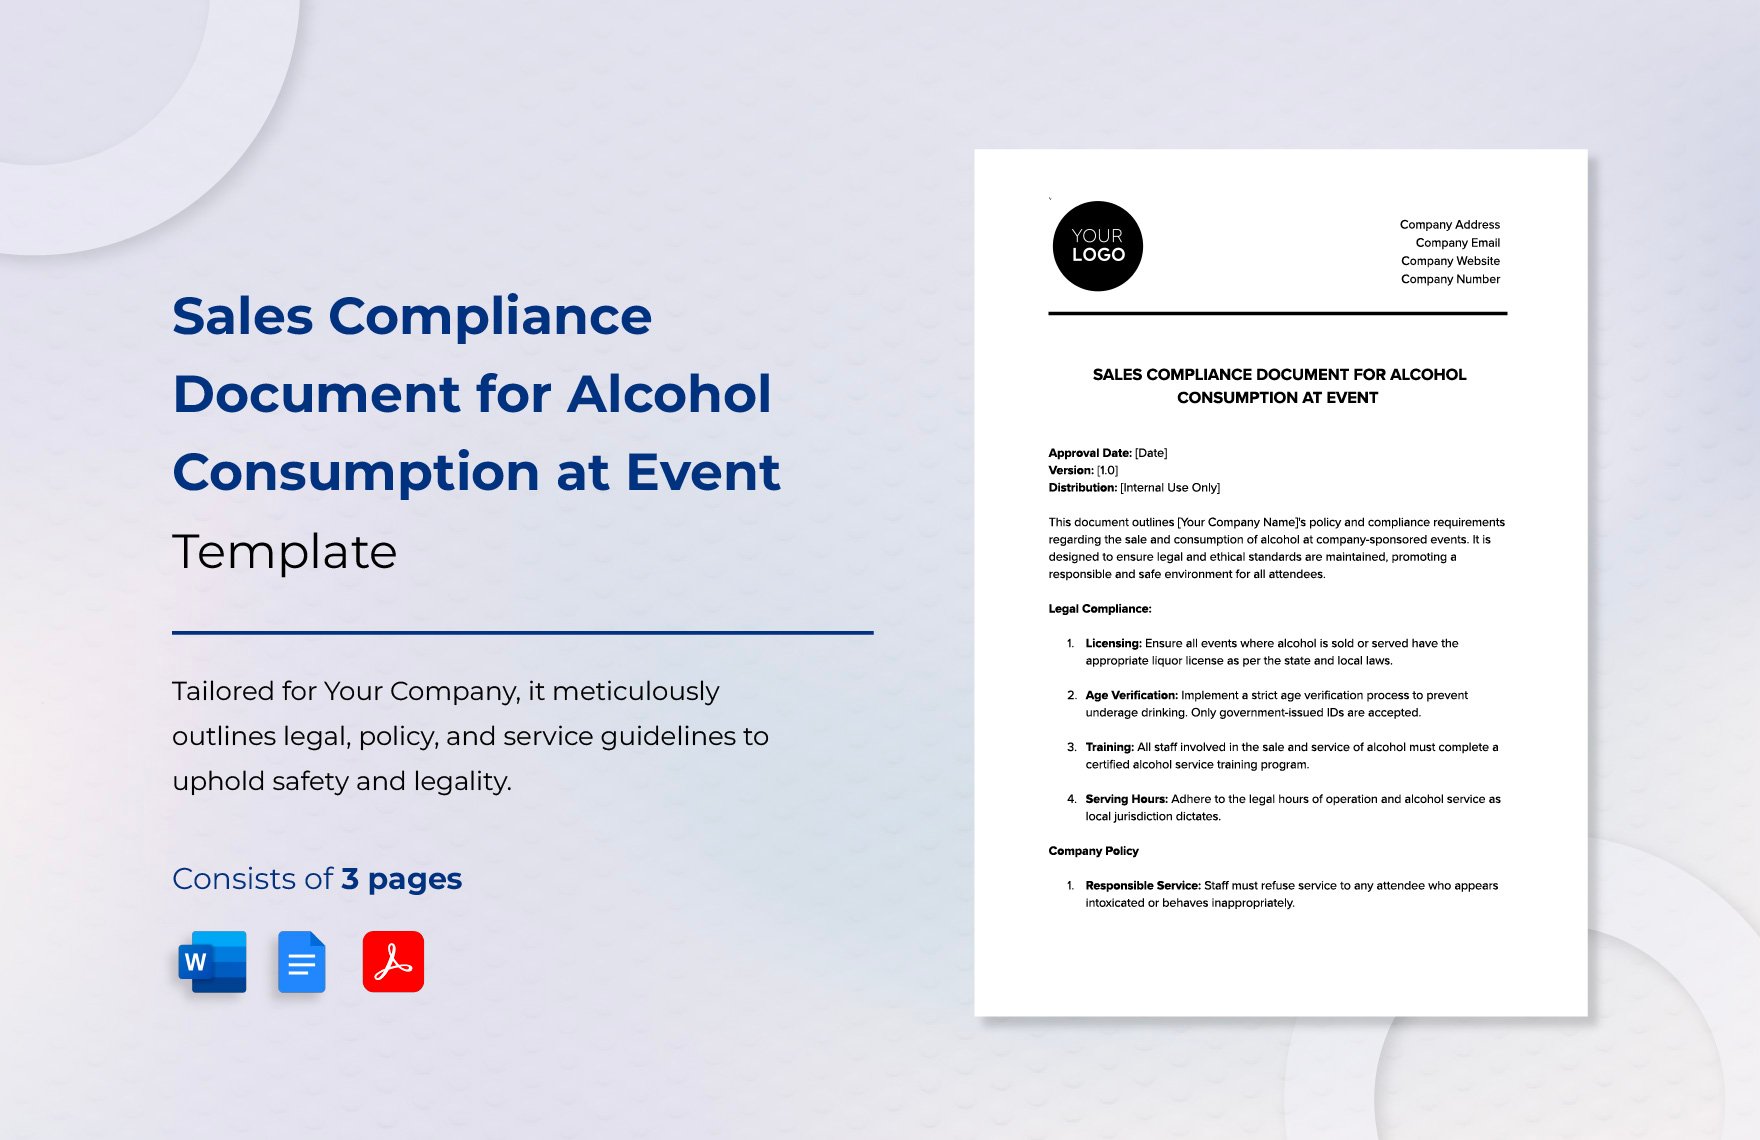 Sales Compliance Document for Alcohol Consumption at Event Template